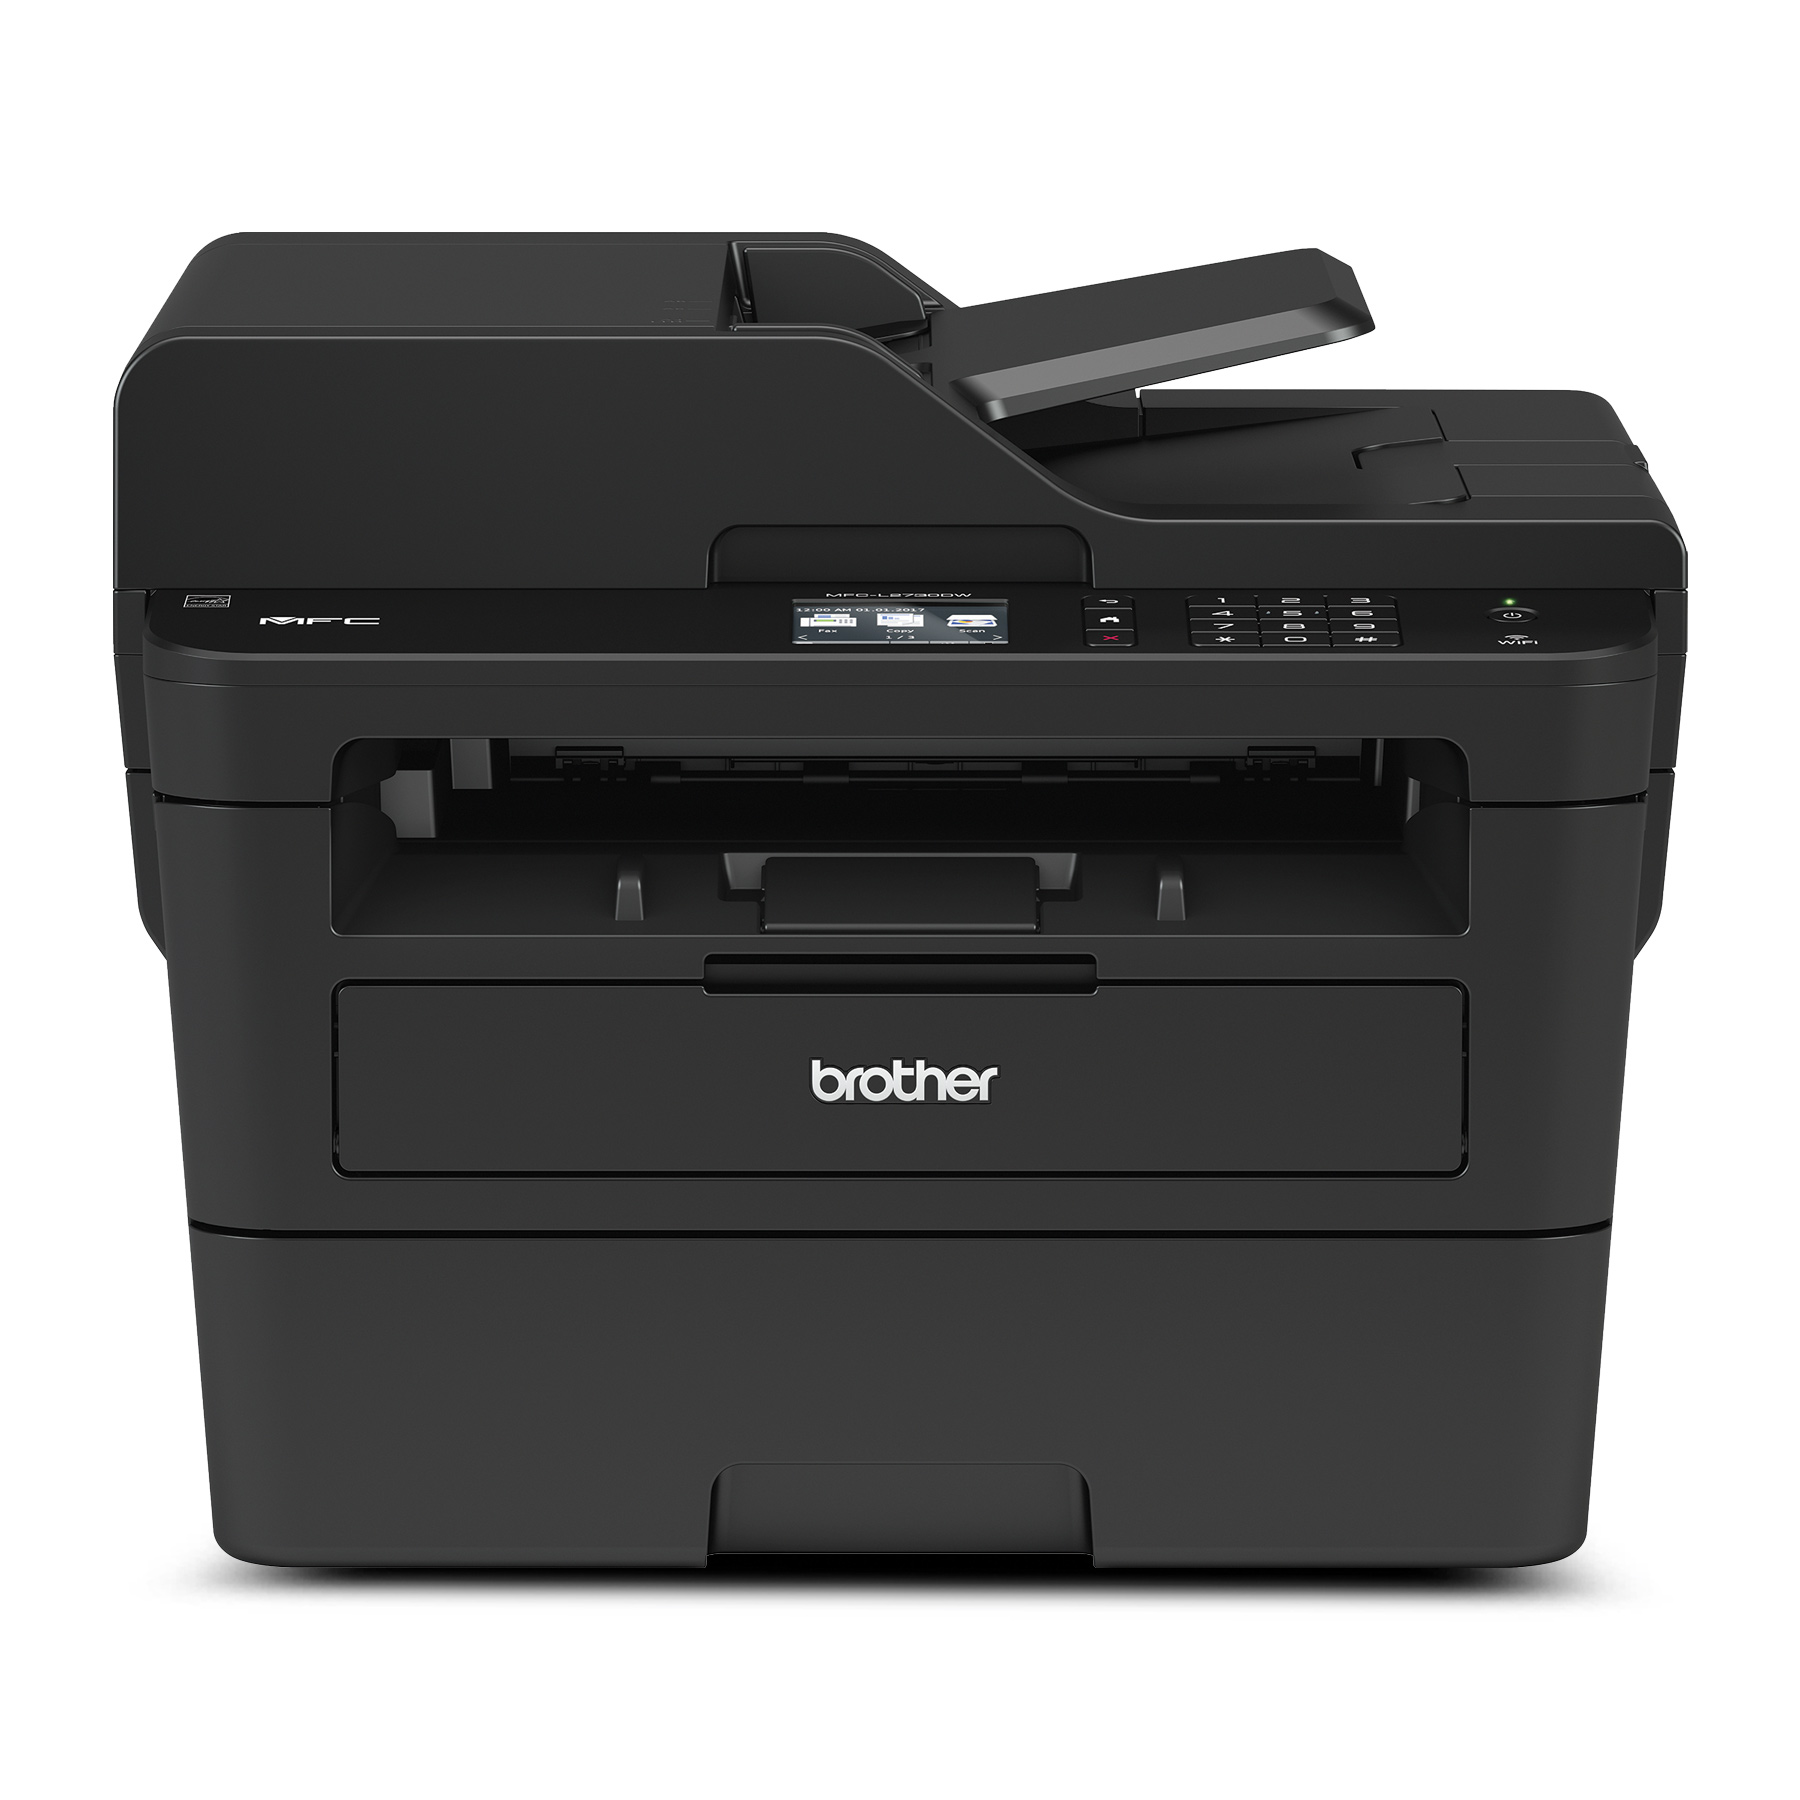 Image of Brother MFC-L2730DW Compact Monochrome Laser Multifunction